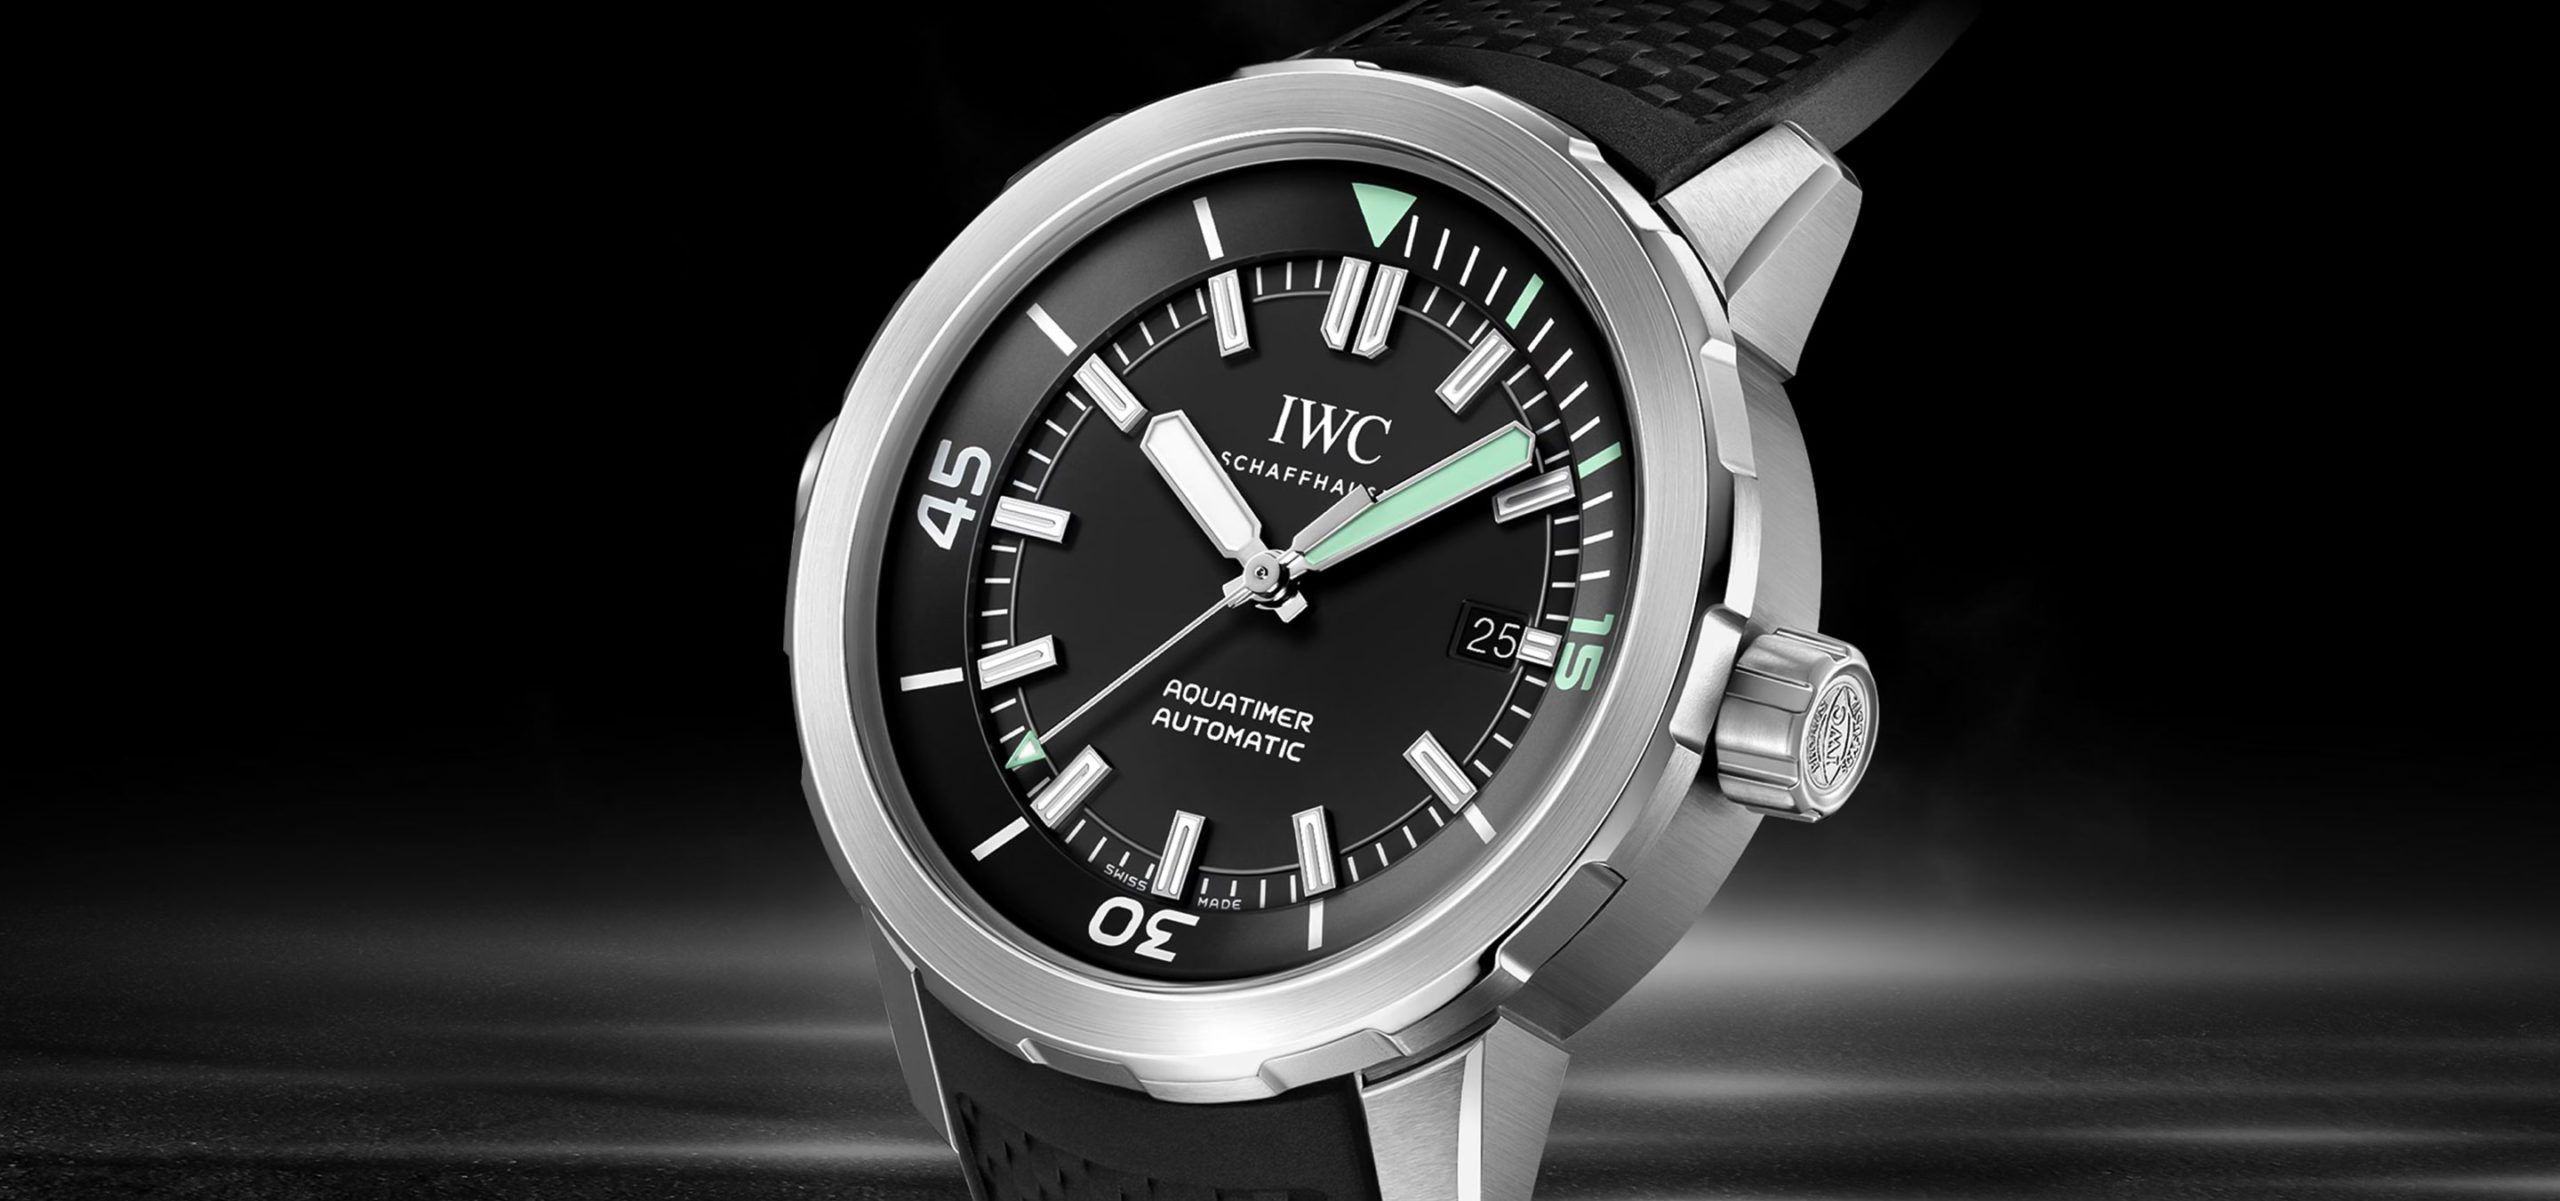 IWC’s Aquatimer Automatic—Now Powered By An In-House Movement